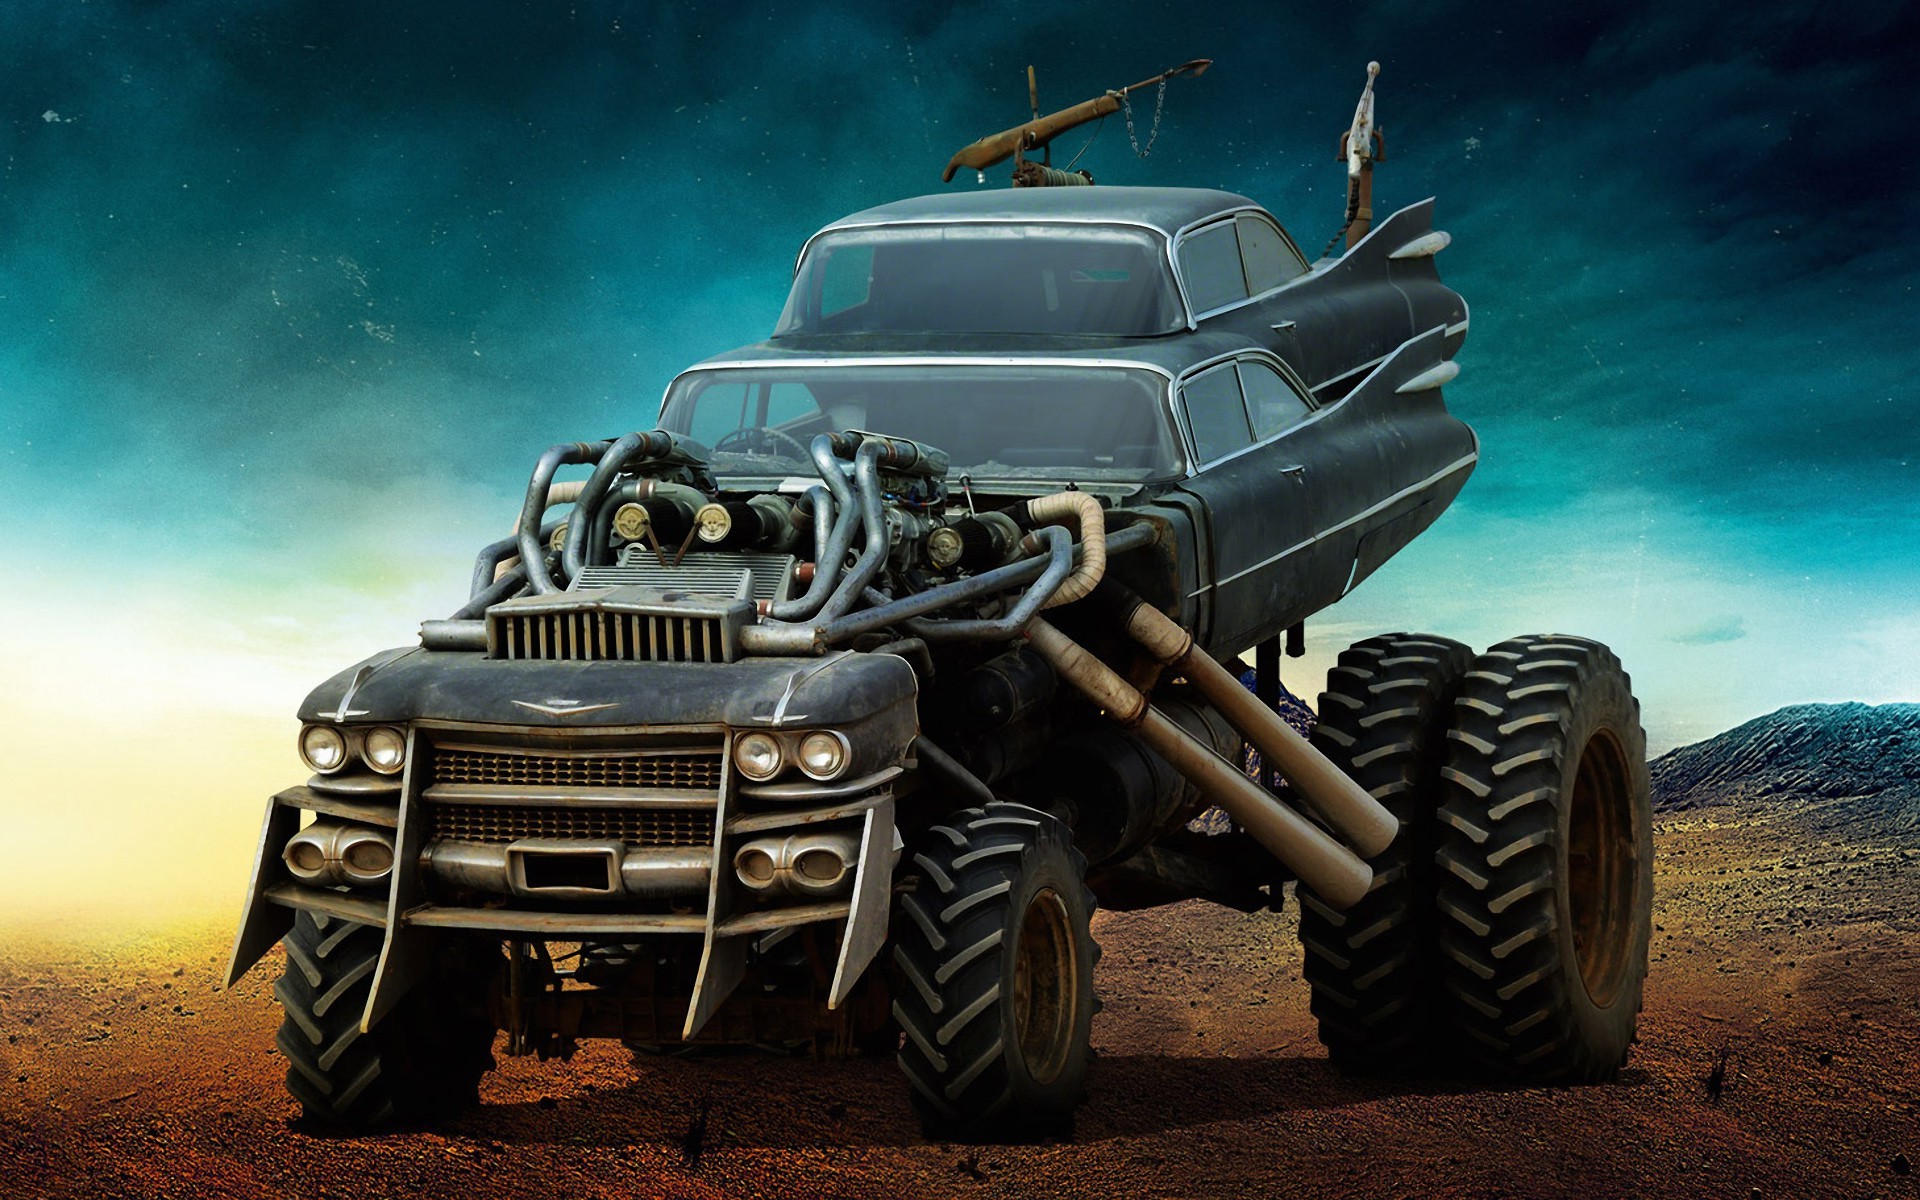 mad wallpapers,motor vehicle,vehicle,automotive tire,monster truck,tire